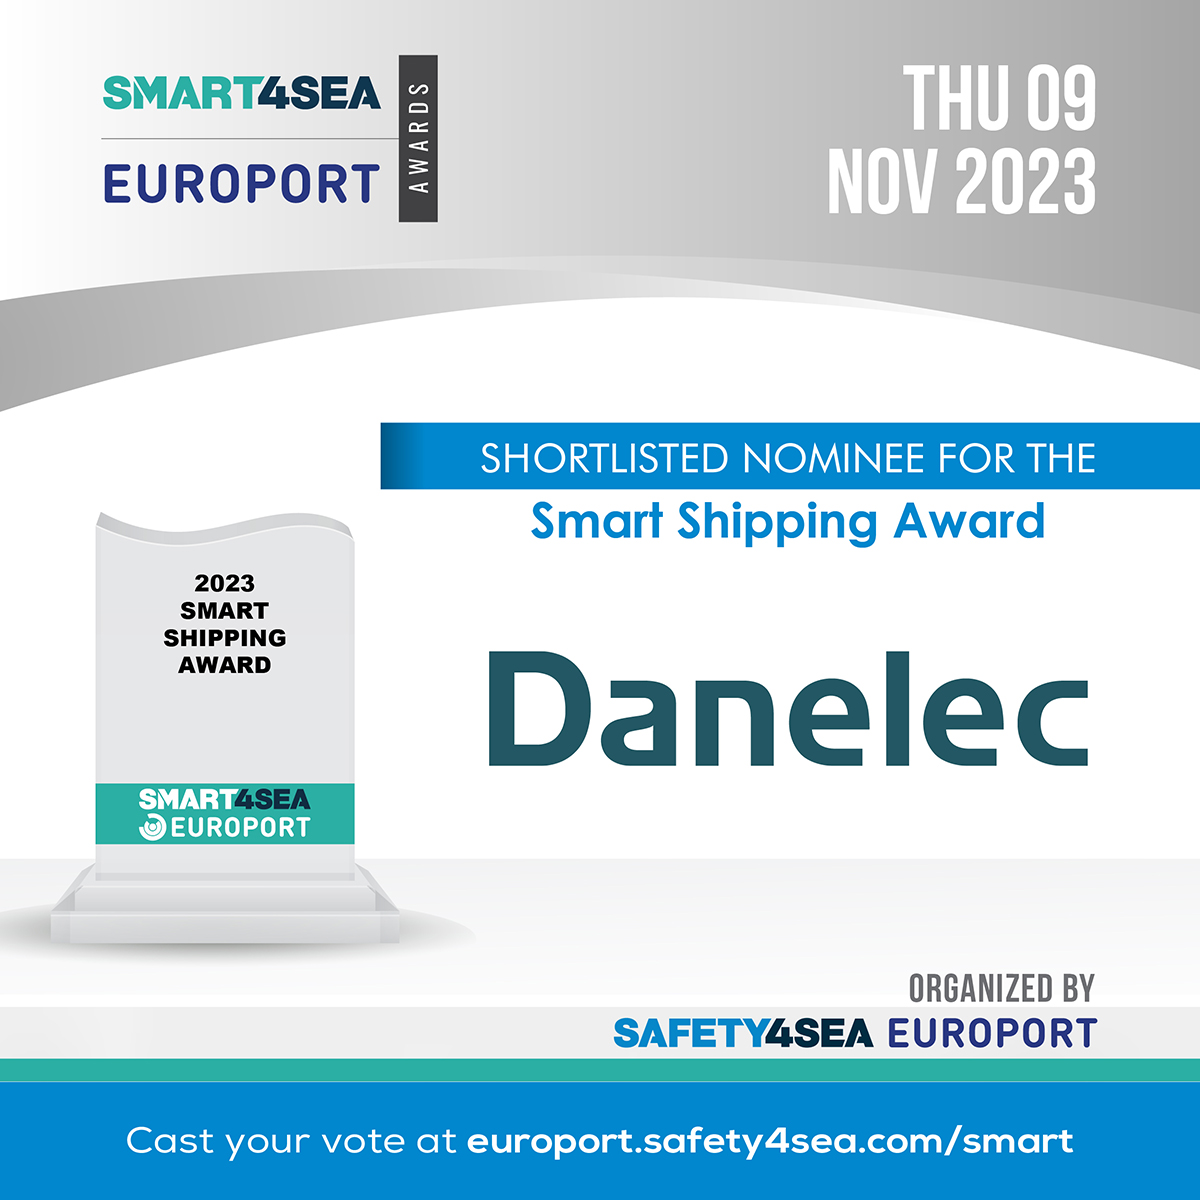 We're stoked to be nominated for the #SMART4SEAEUROPORT Award! Help us make waves 🌊 in the maritime industry with our Kyma SHaPoLi solution. Your vote counts! Cast it here: secure.pinnion.com/pepl/pinnion.p…

#SustainableShipping #GreenShipping #VoteForUs